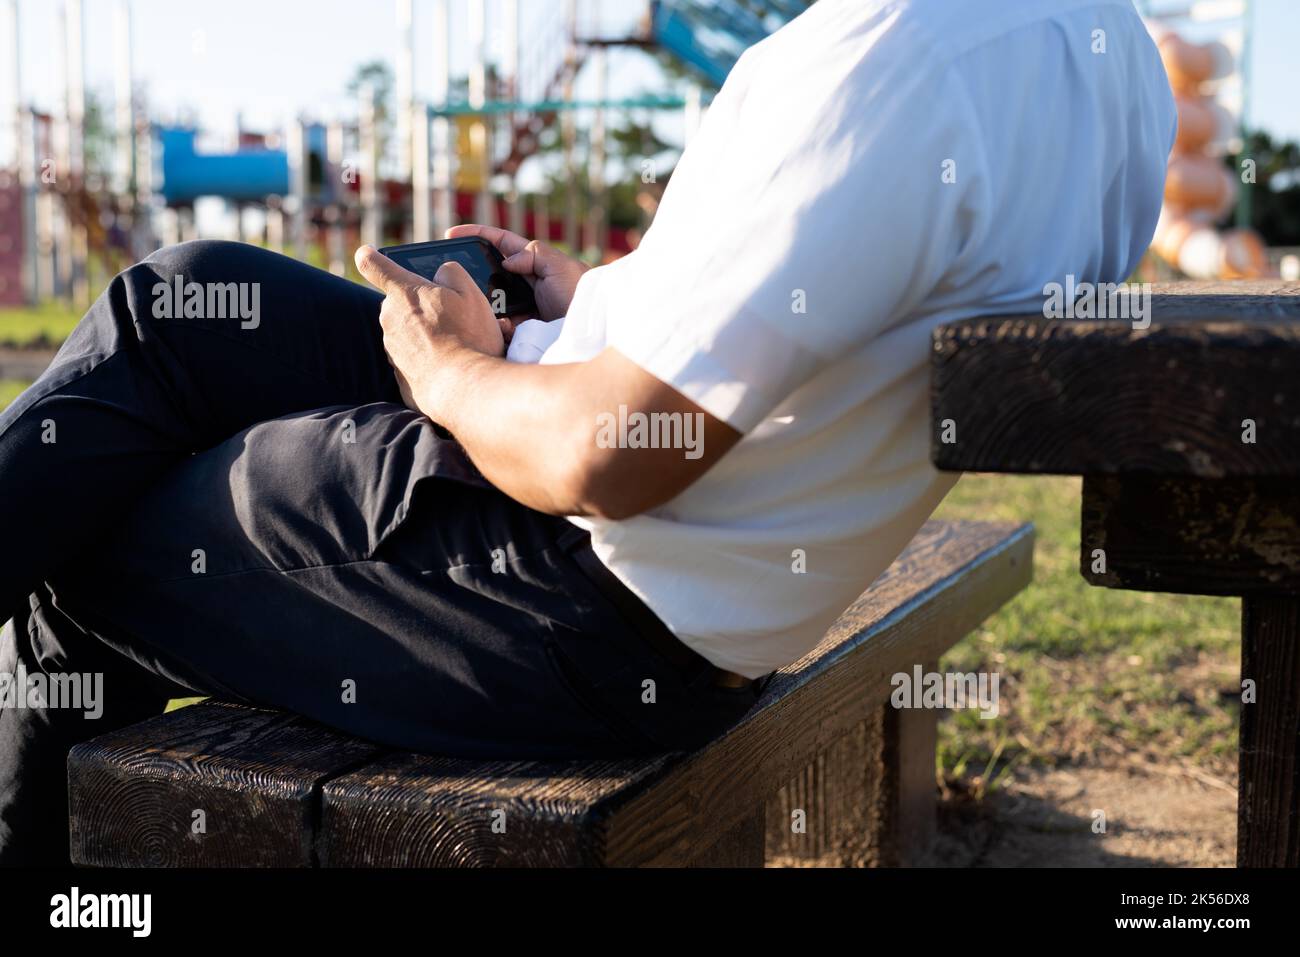 A man playing mobile phone games or smartphone game and sitting on a bench during sunset. Stock Photo